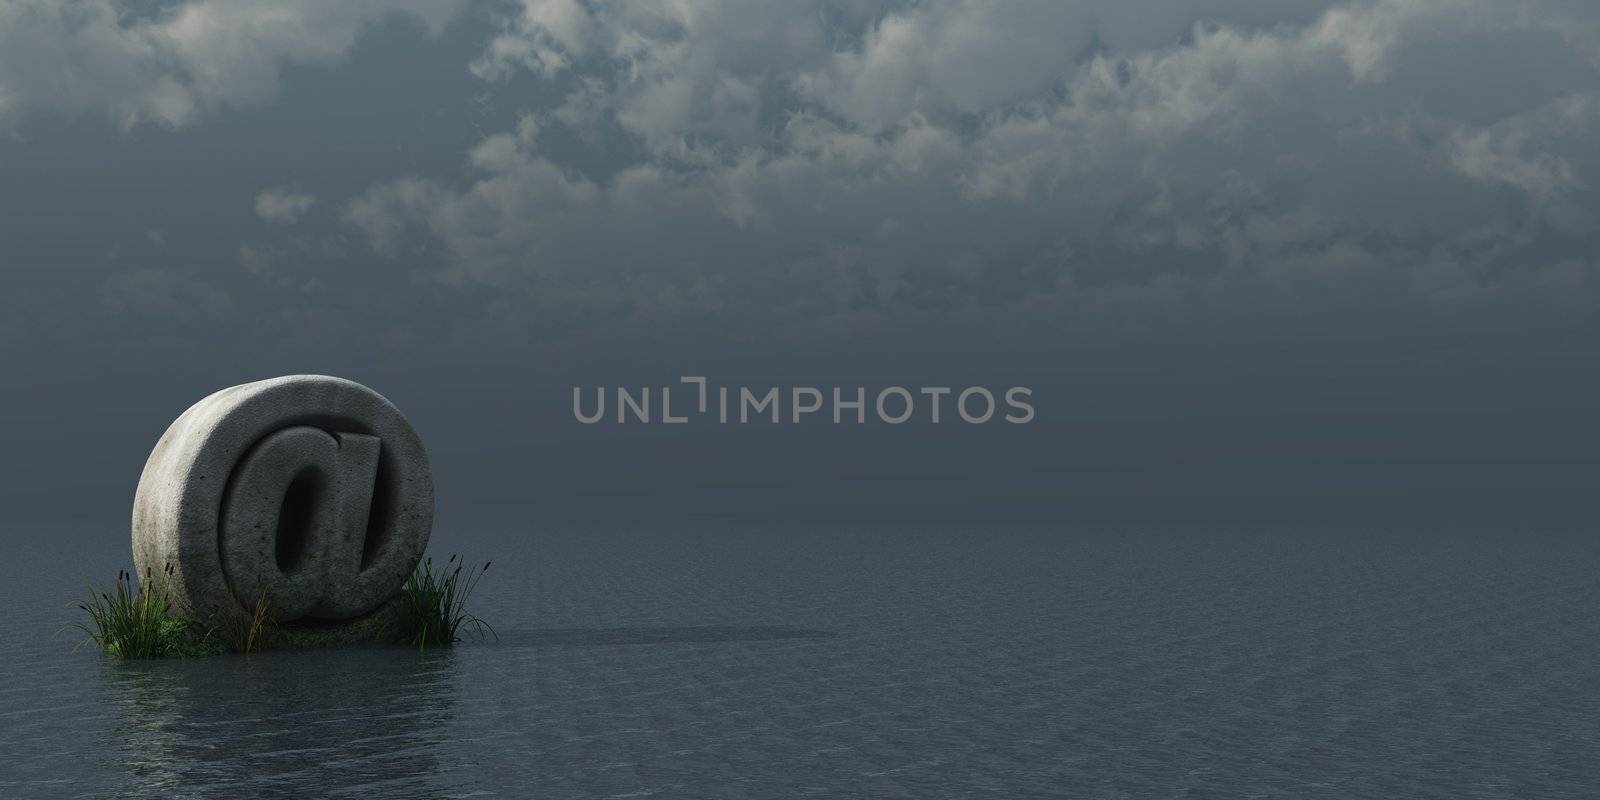 stone email alias at the ocean - 3d illustration